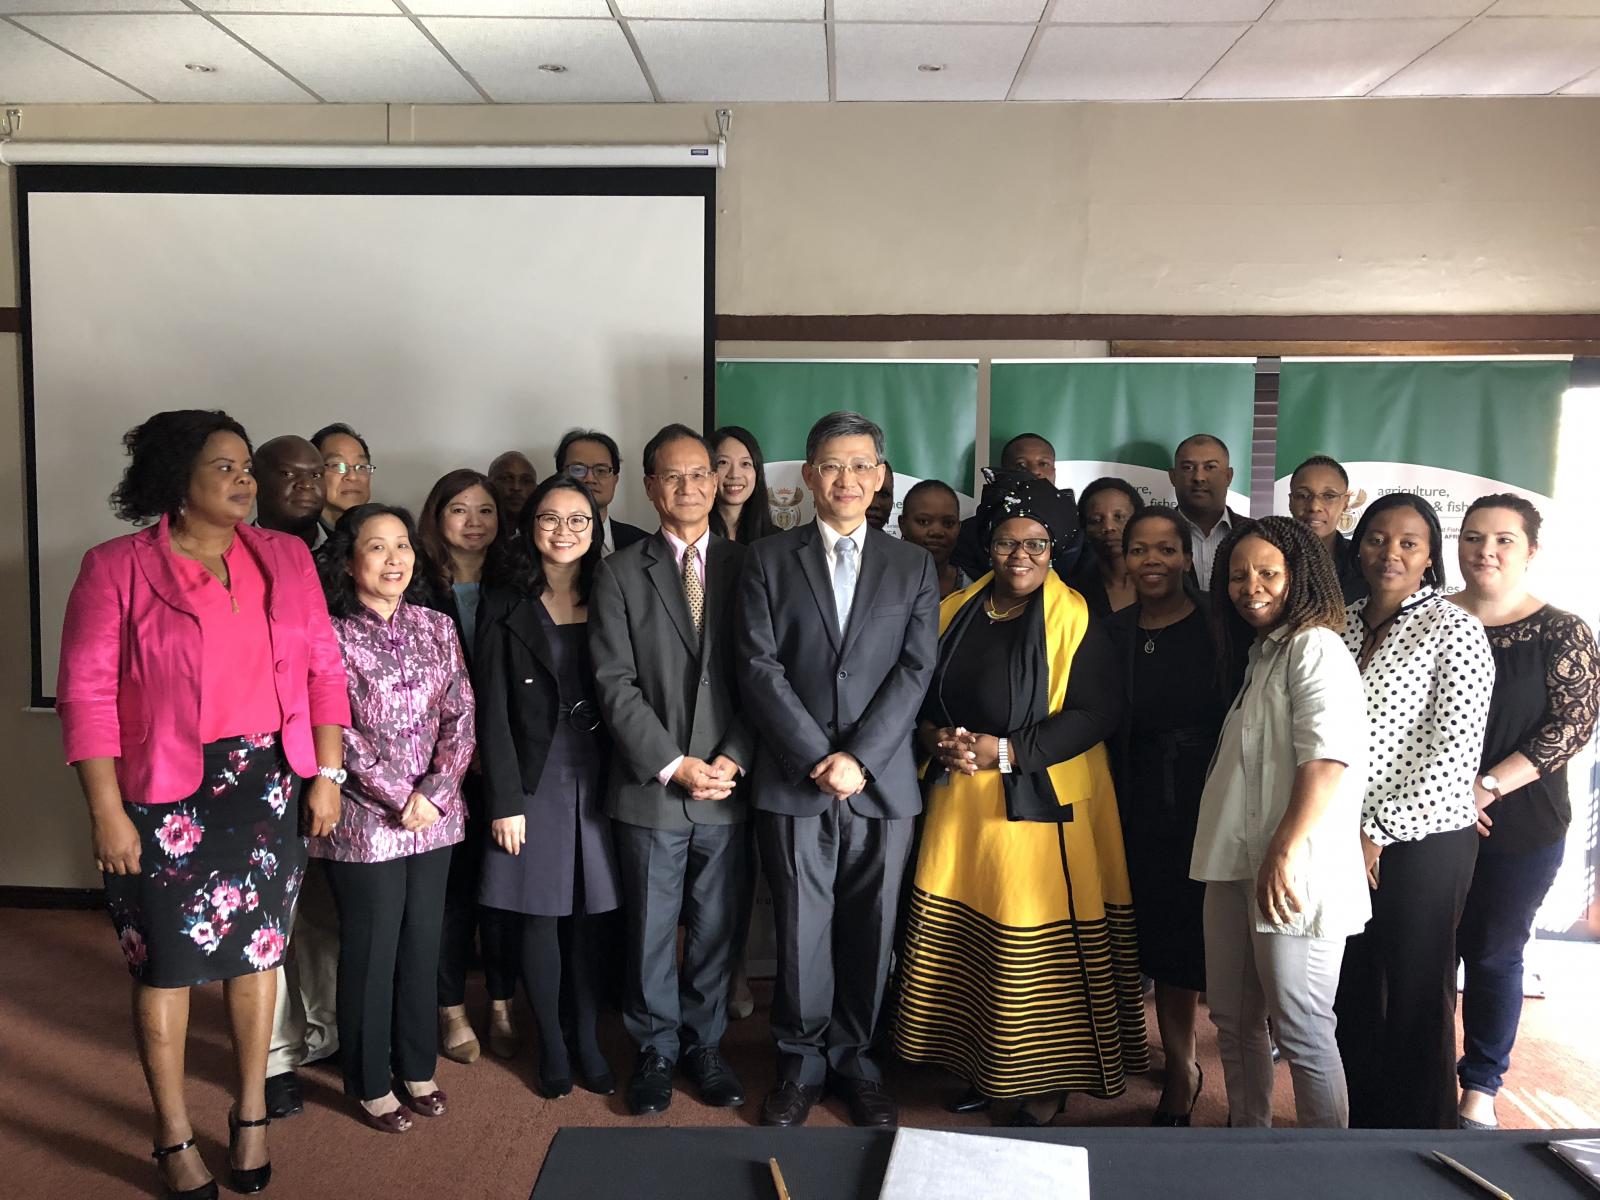 A group photo from the 3rd Meeting of the Taiwan-South Africa Joint Working Committee for Agriculture, Forestry, and Fisheries.